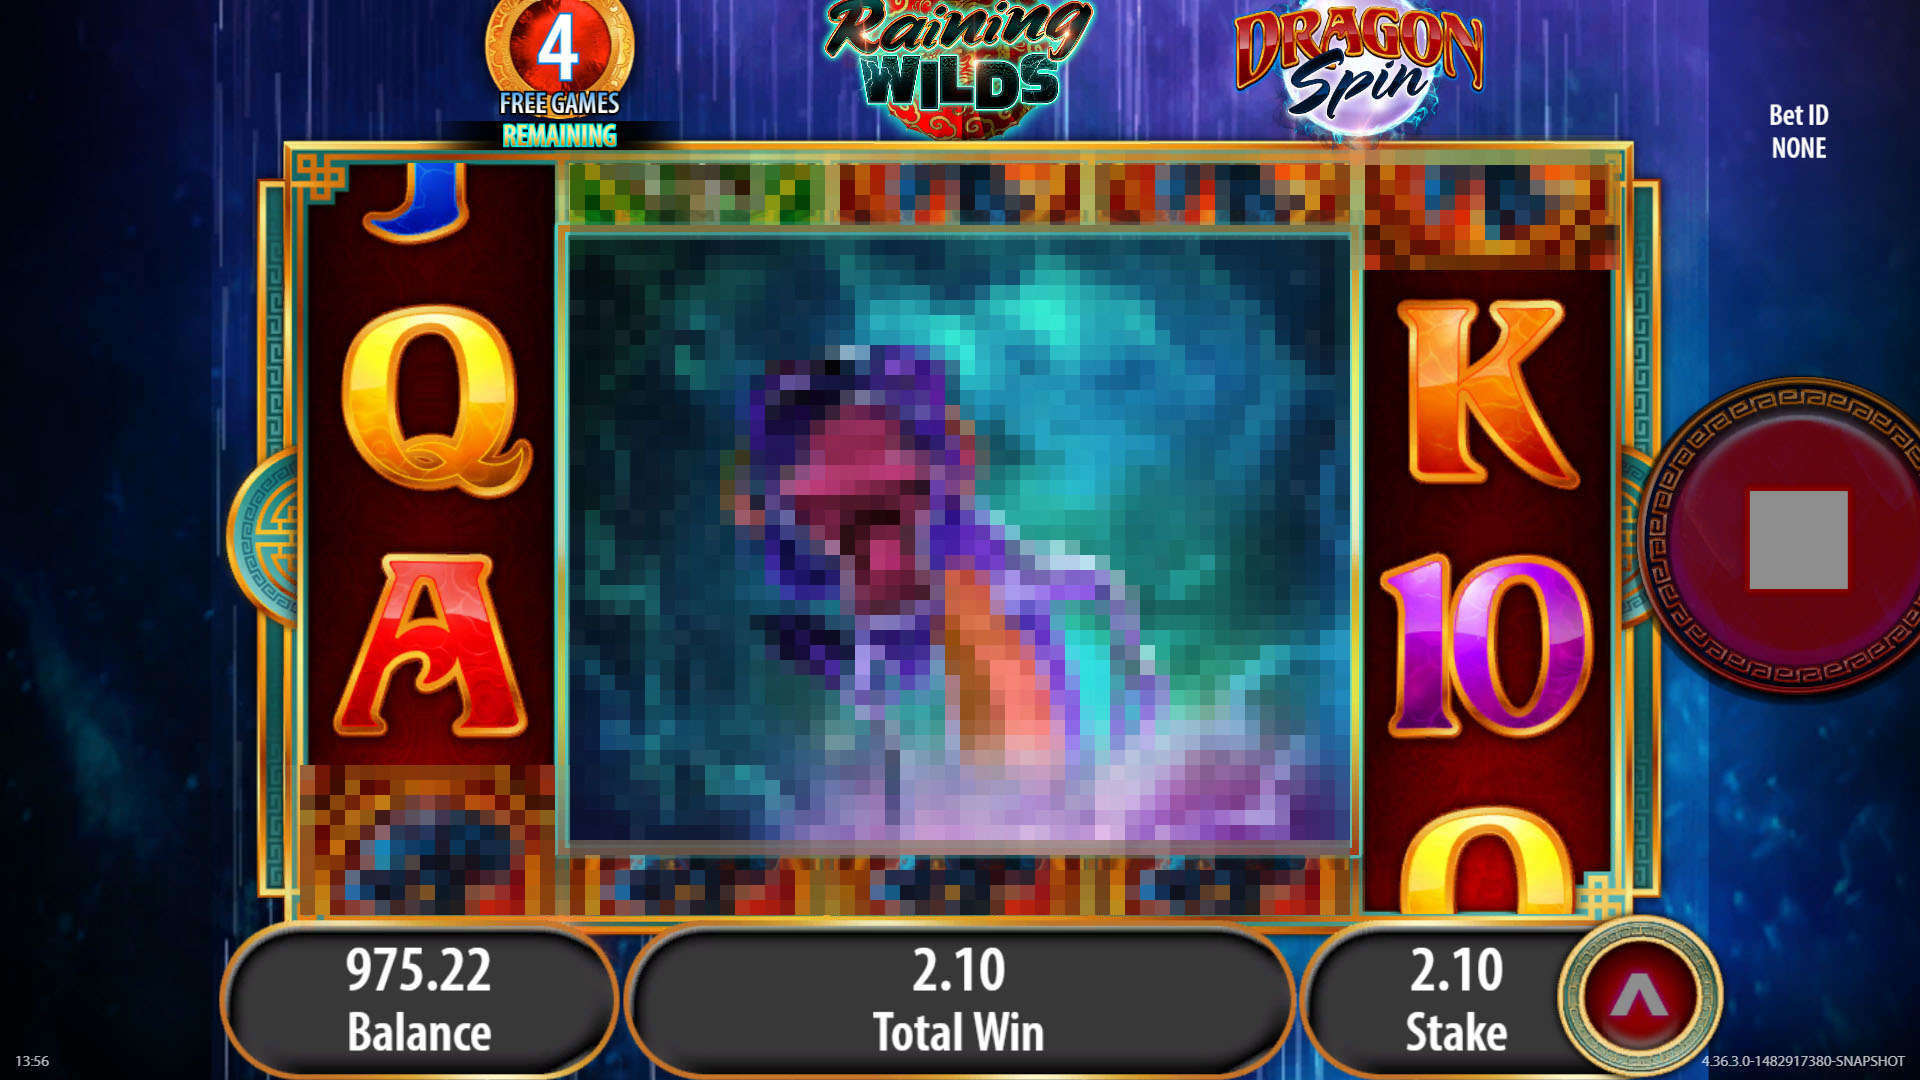 6/23/ · Enter a world of mystical dragons and big wins in the line Dragon Spin slot by Bally with Mystery Stacked Wilds, Reel Blast, Free Spins and more!/5.Umurlu